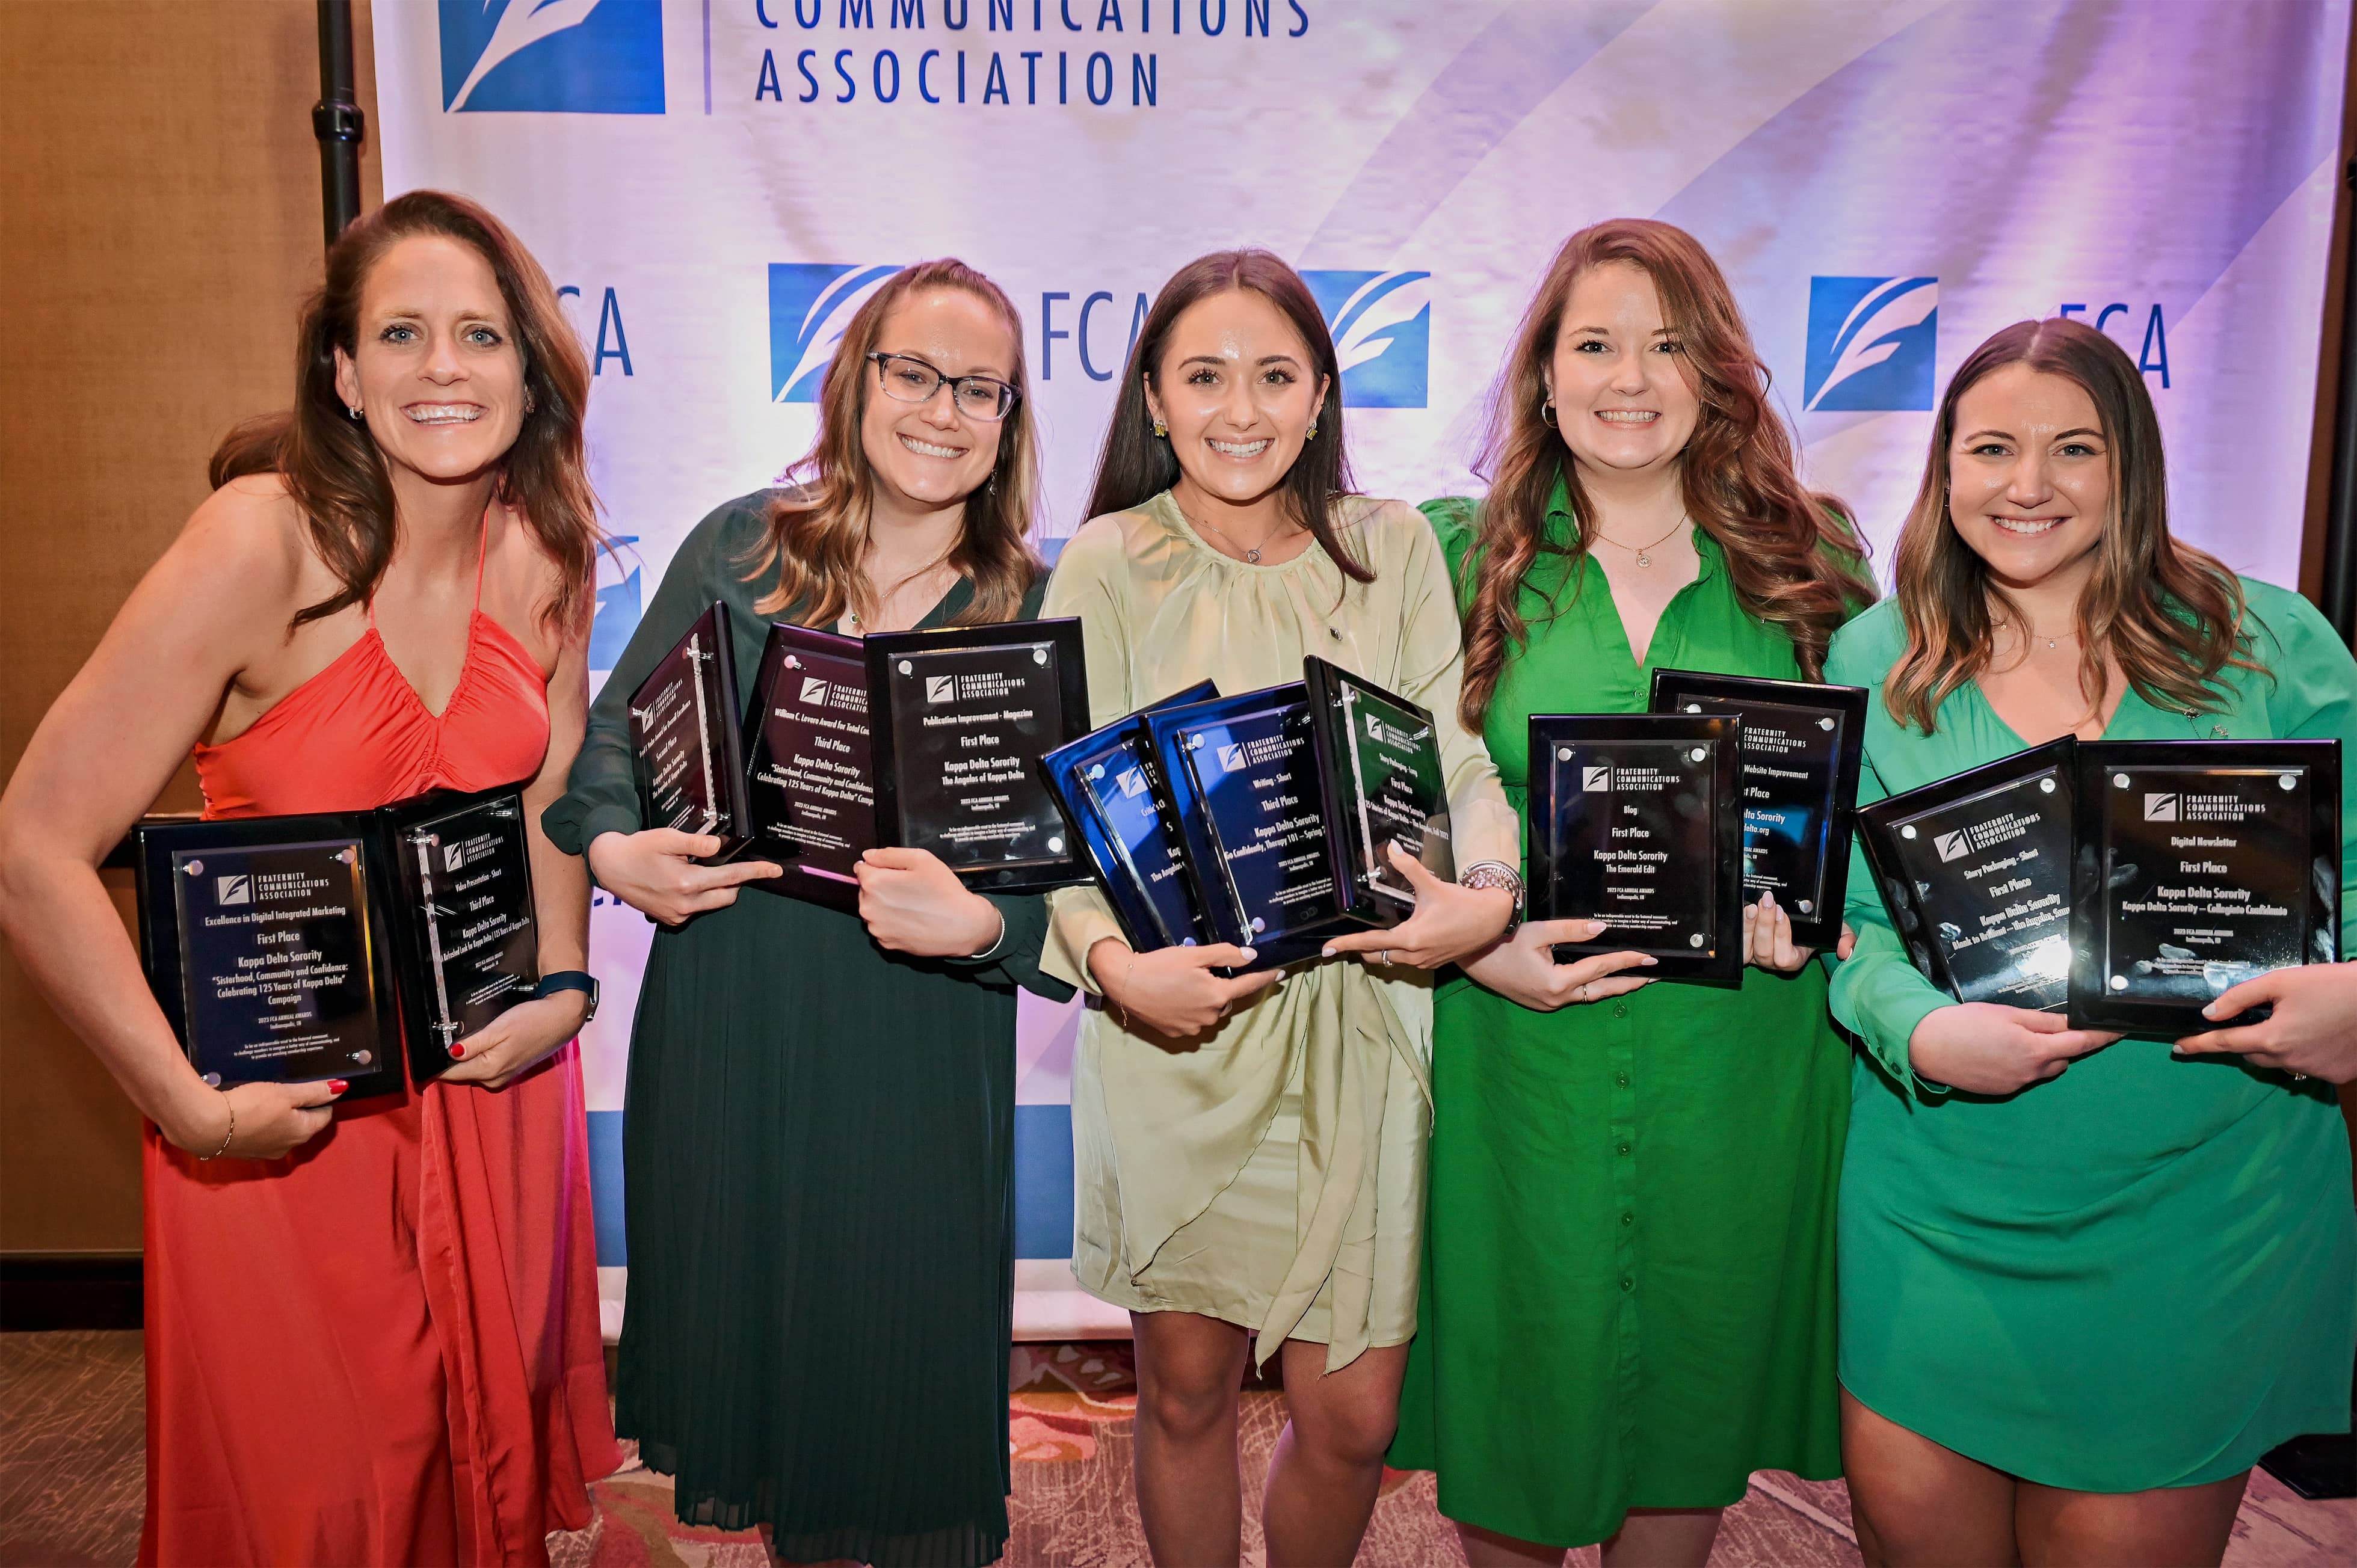 Kappa Delta holding all of their awards from the Fraternity Communications Association’s Annual Conference